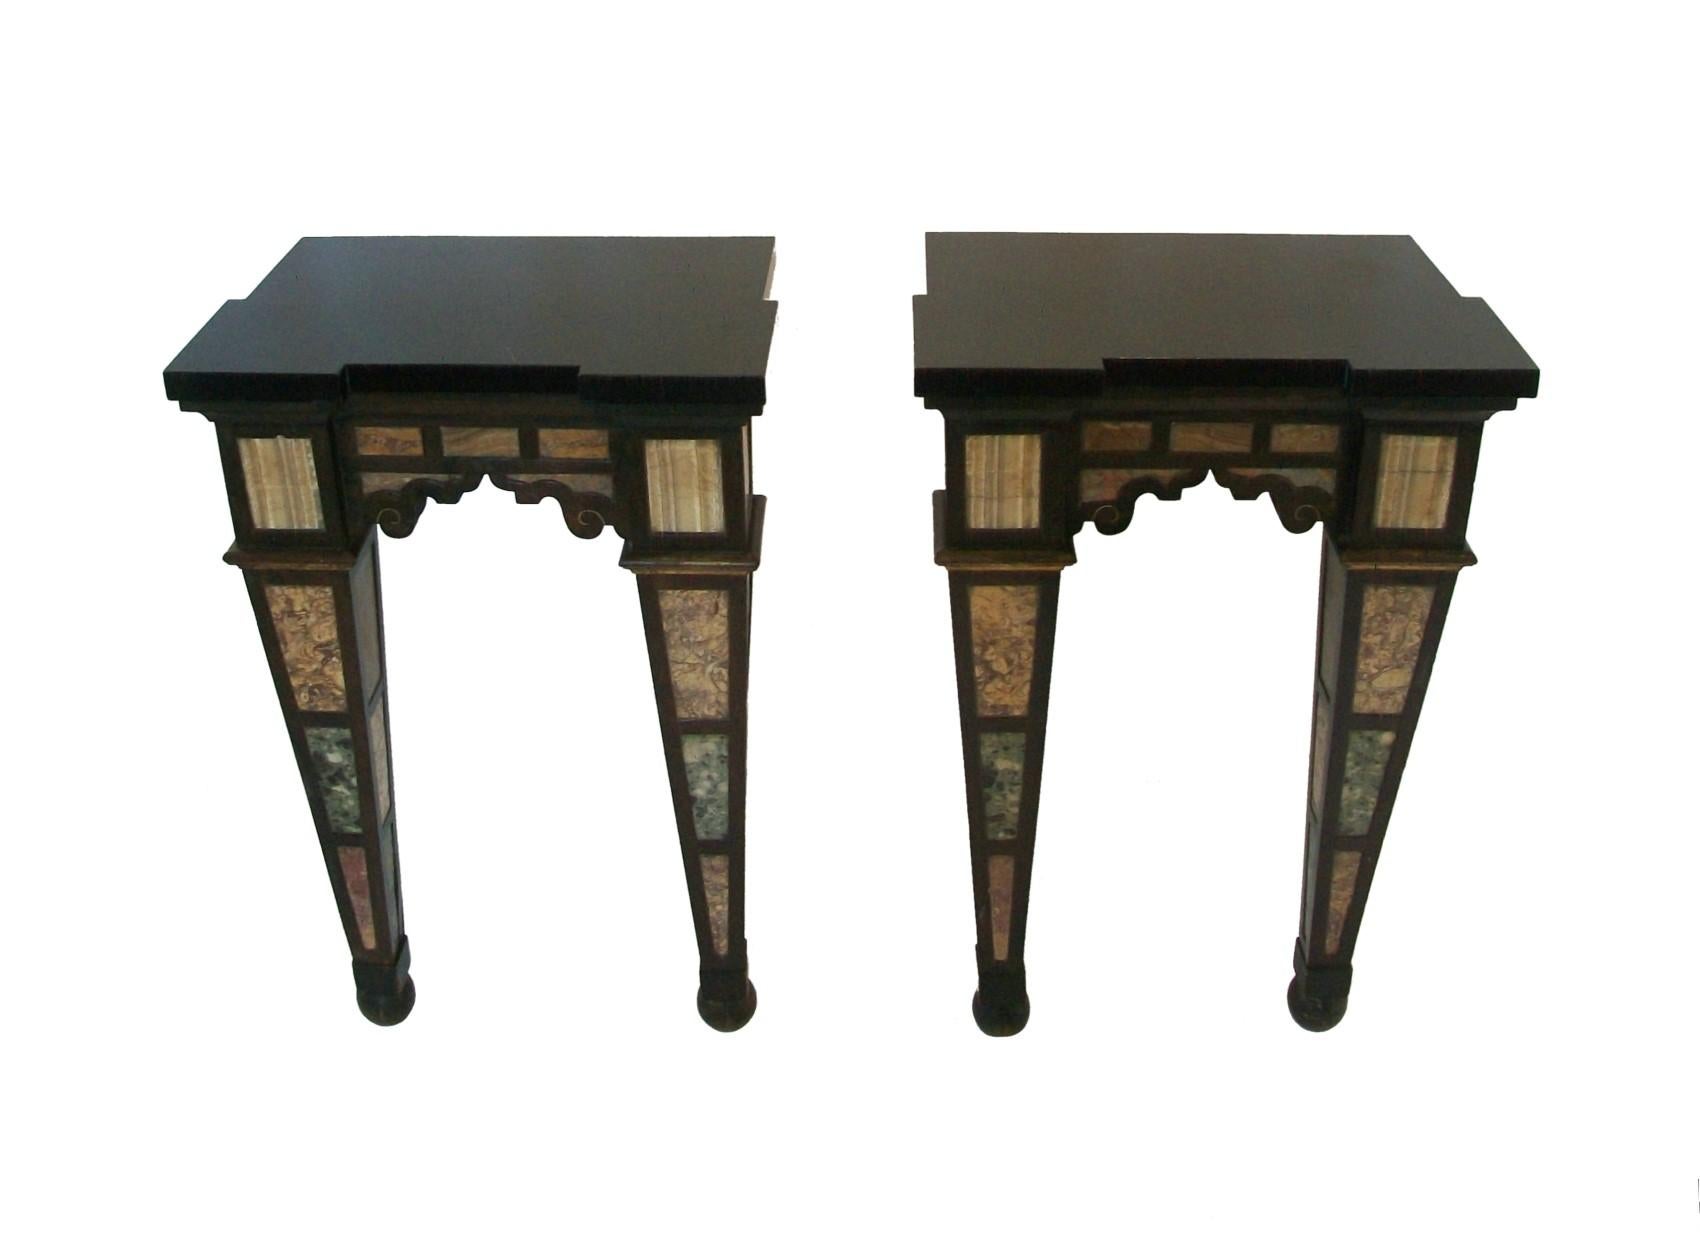 Rare pair of antique specimen marble console tables - featuring a variety of inset marbles and onyx to all sides within a tooled hardwood frame - each leg a reverse obelisk terminating on a ball foot, all four sides of the legs finished (important